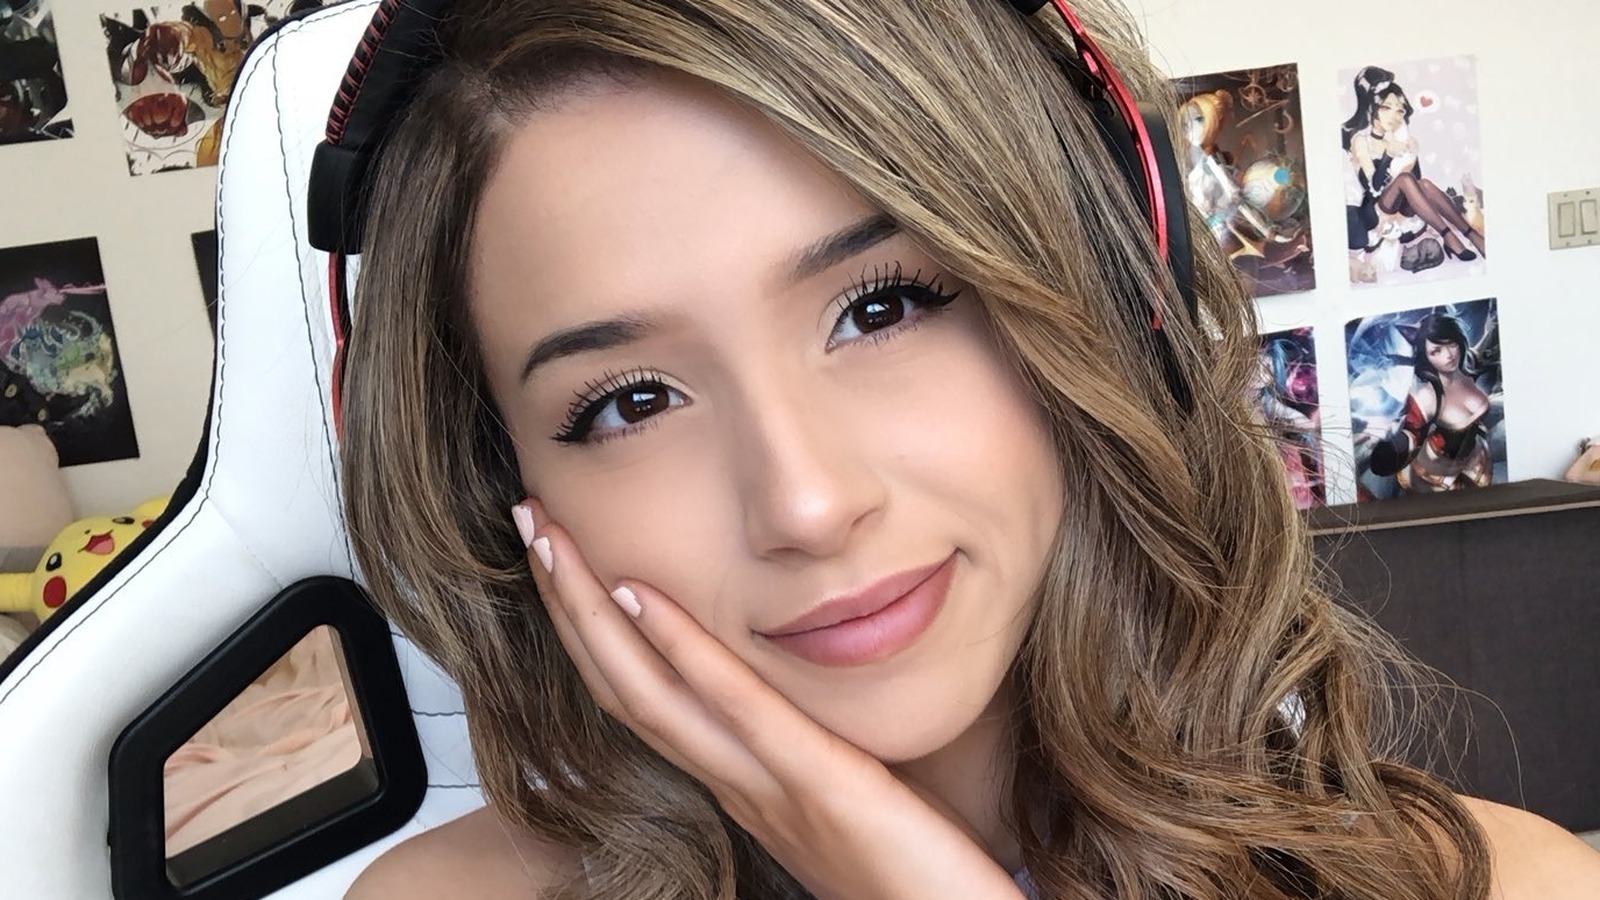 Pokimane Reveals The Game She Would Want To Live In - Exclusive.